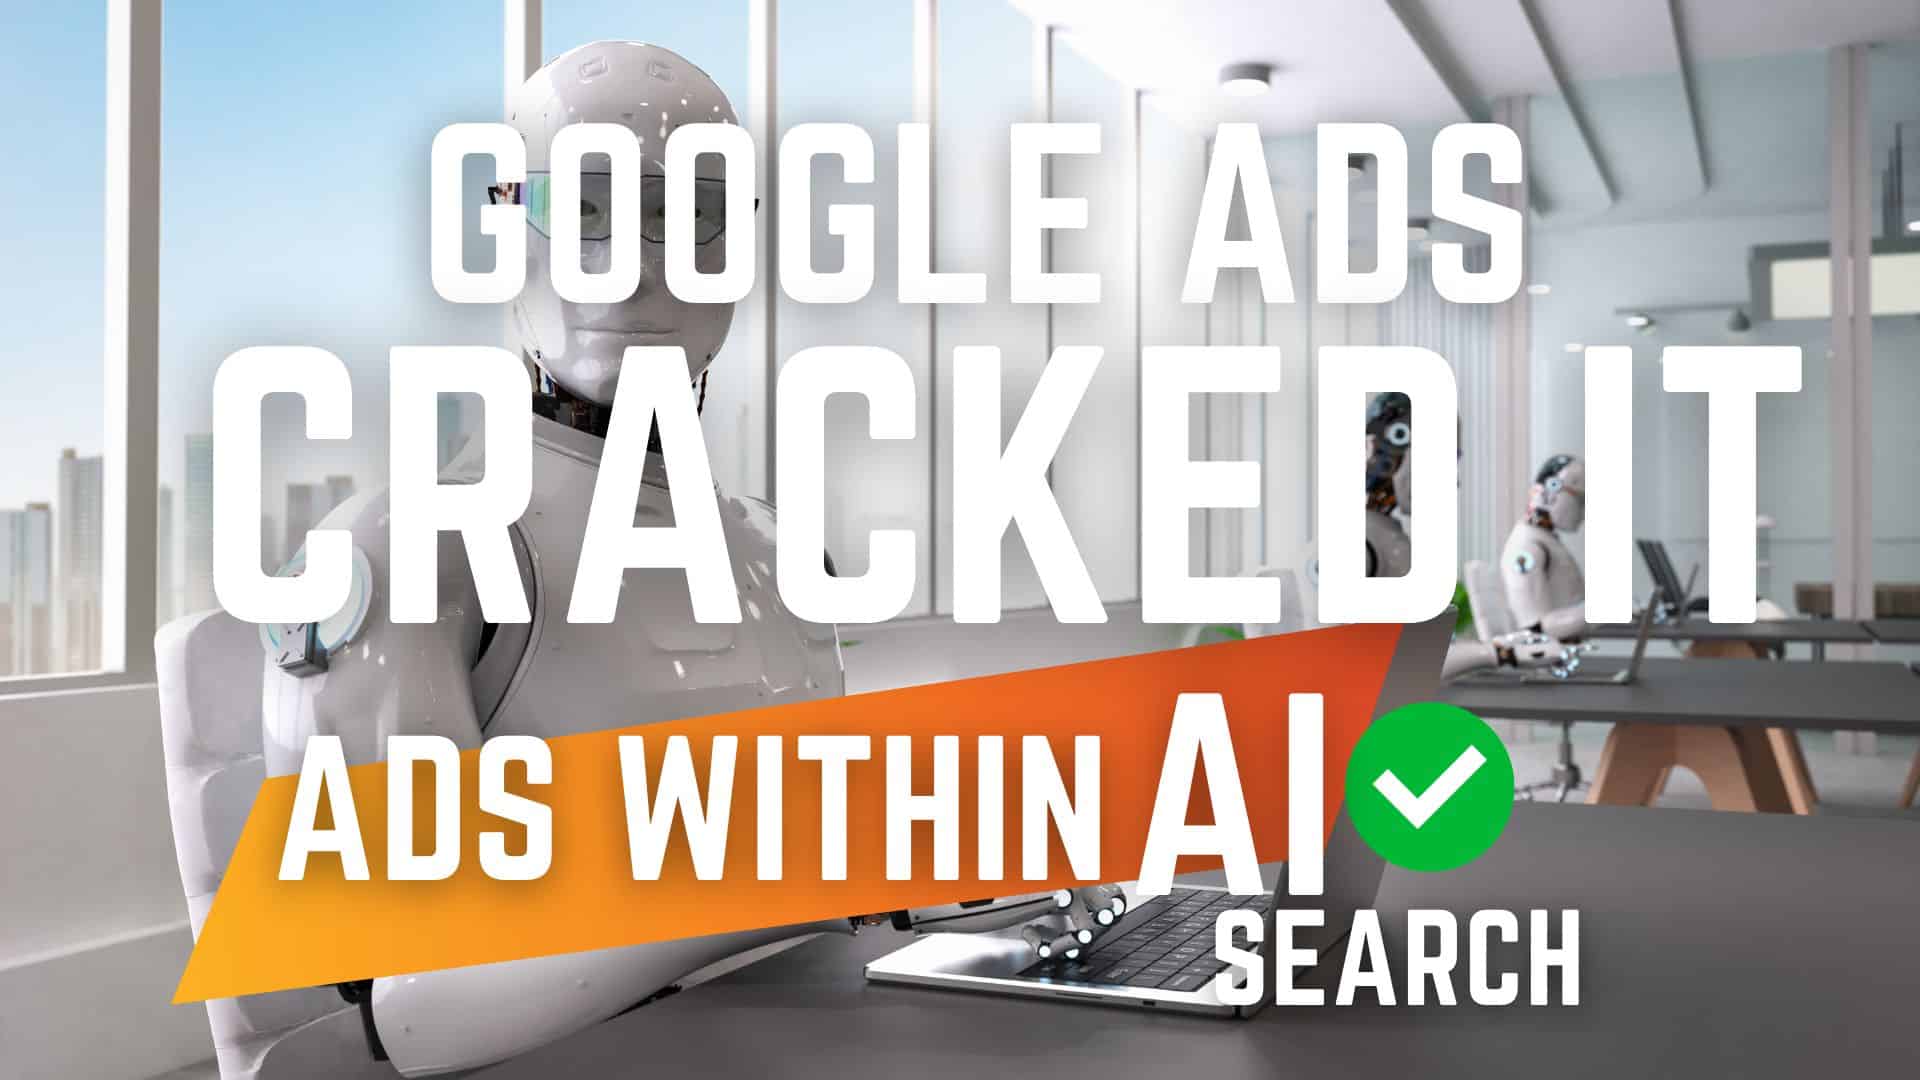 Google ads just revolutionized the Ai search ads industry. Shows Ai robot using a computer